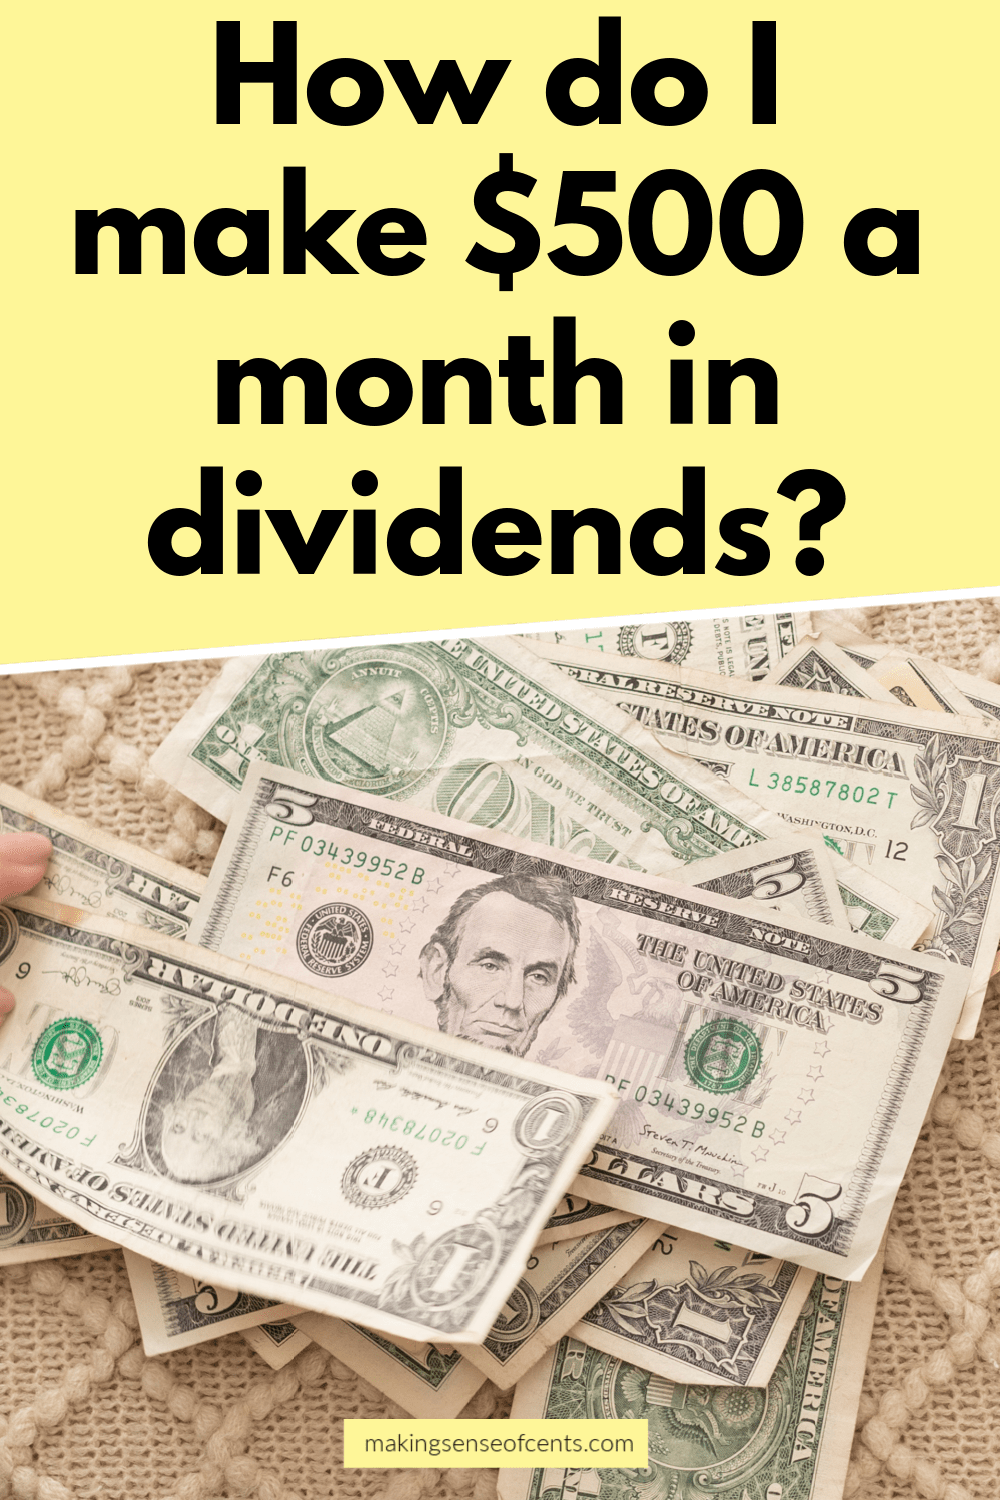 what are dividends